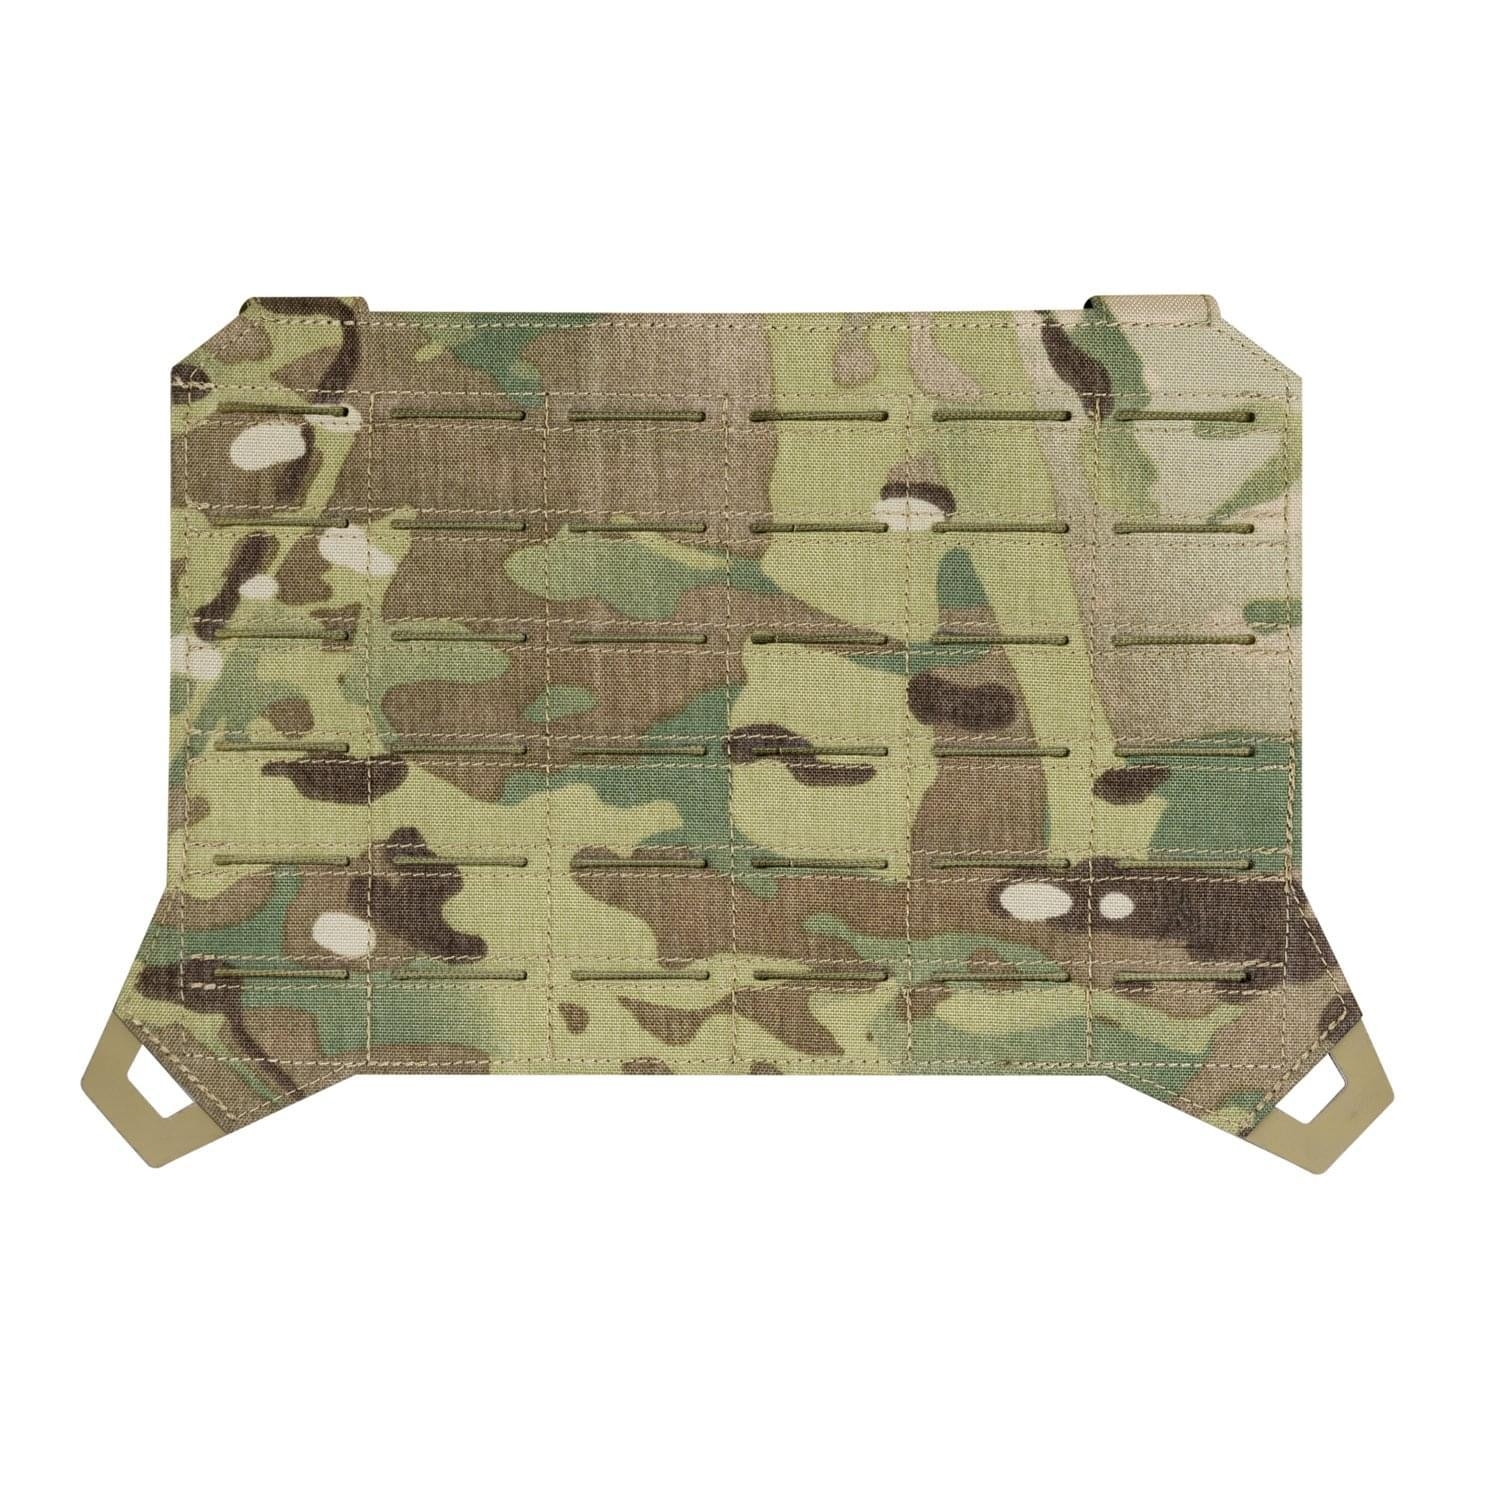 Image of Panel Direct Action SPITFIRE MOLLE FLAP - Cordura - MultiCam (PC-MLFP-CD5-MCM)